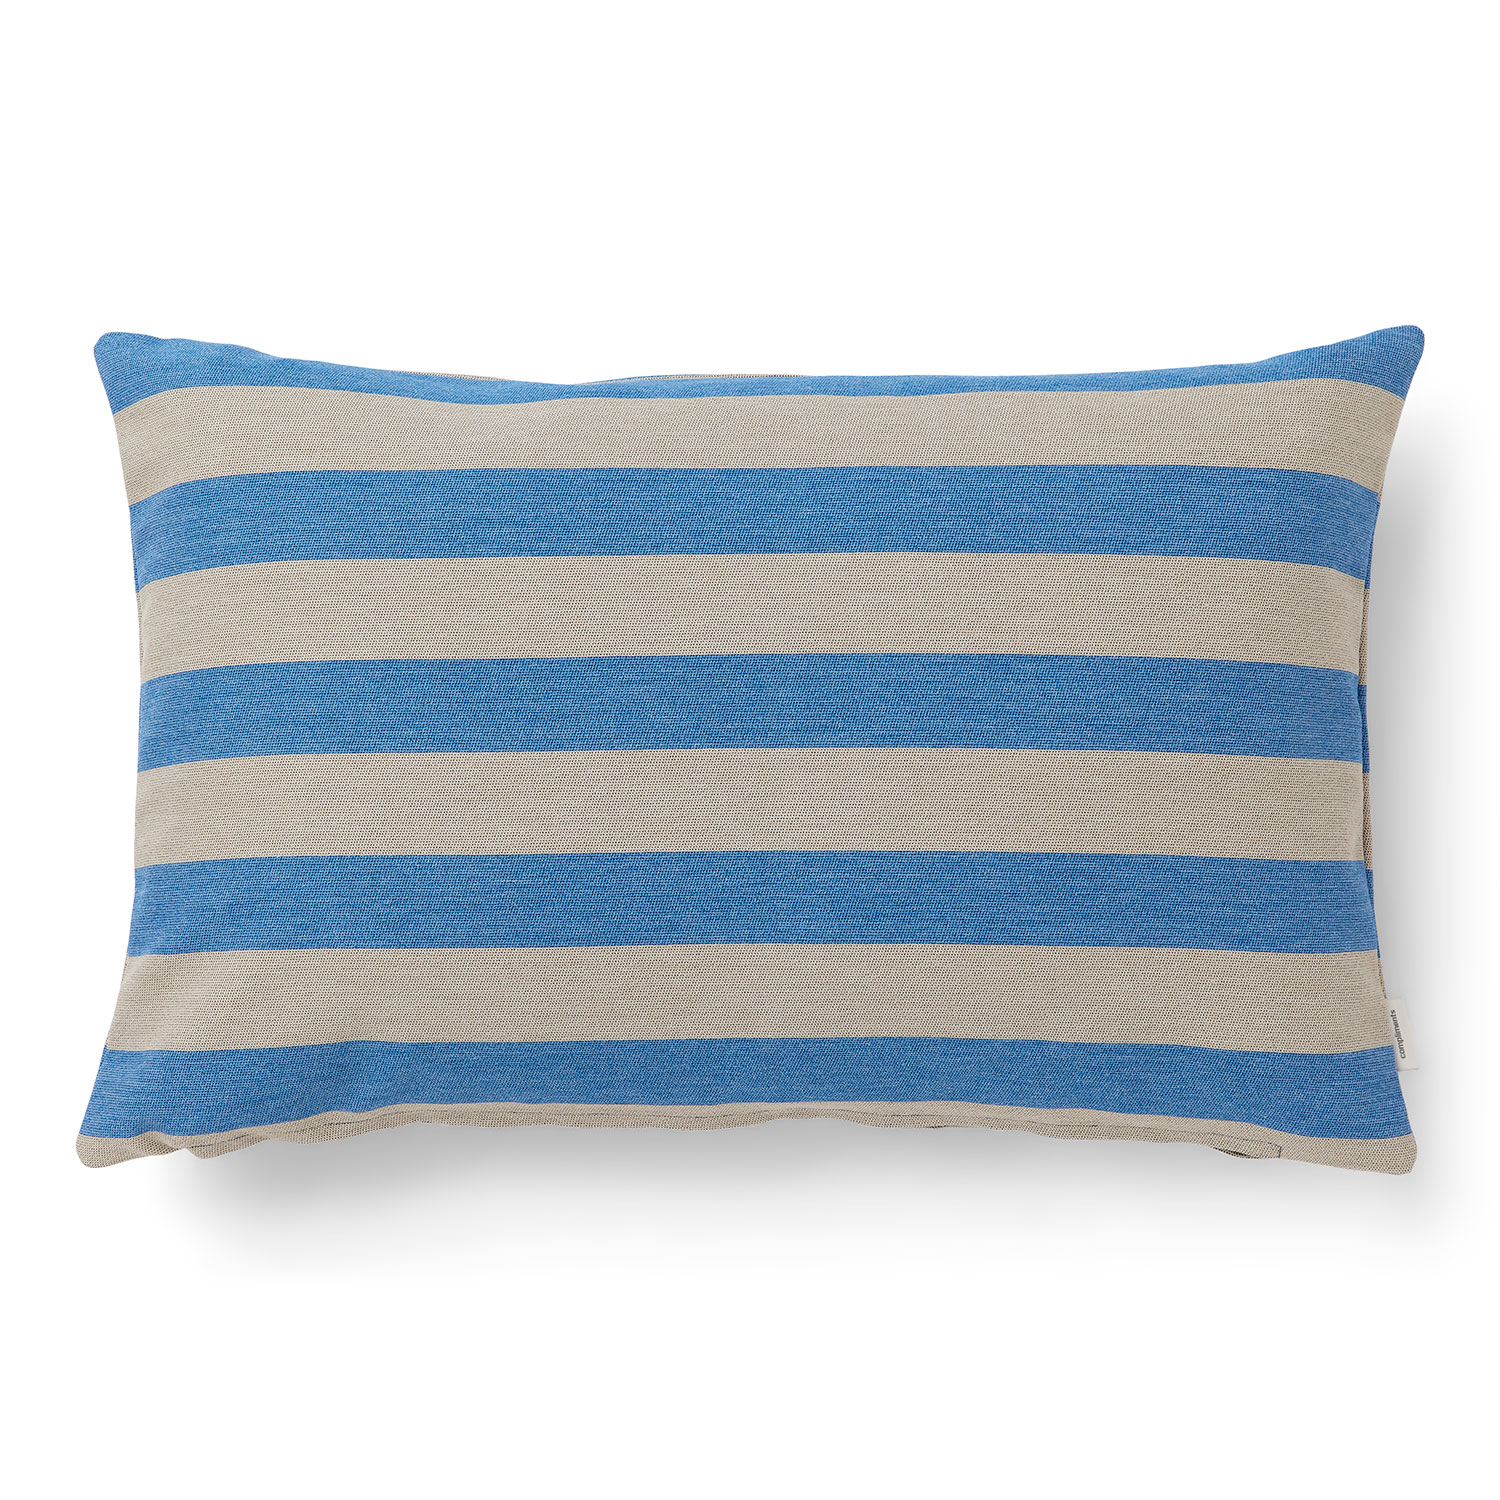 Compliments Pude Outdoor Stripe, Blue